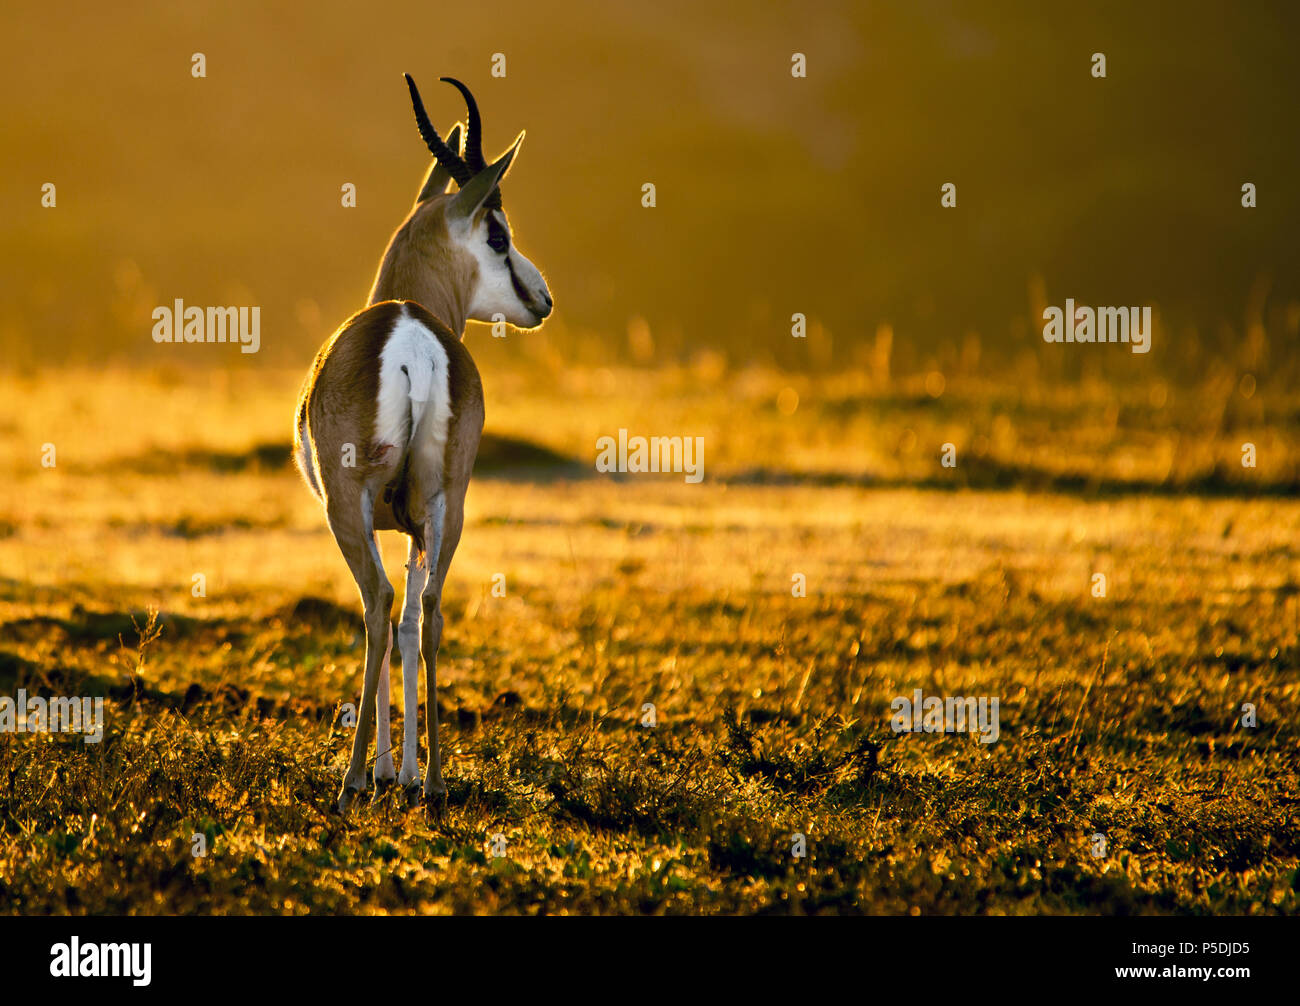 South African national animal, the springbuck in beautiful morning sun. Stock Photo